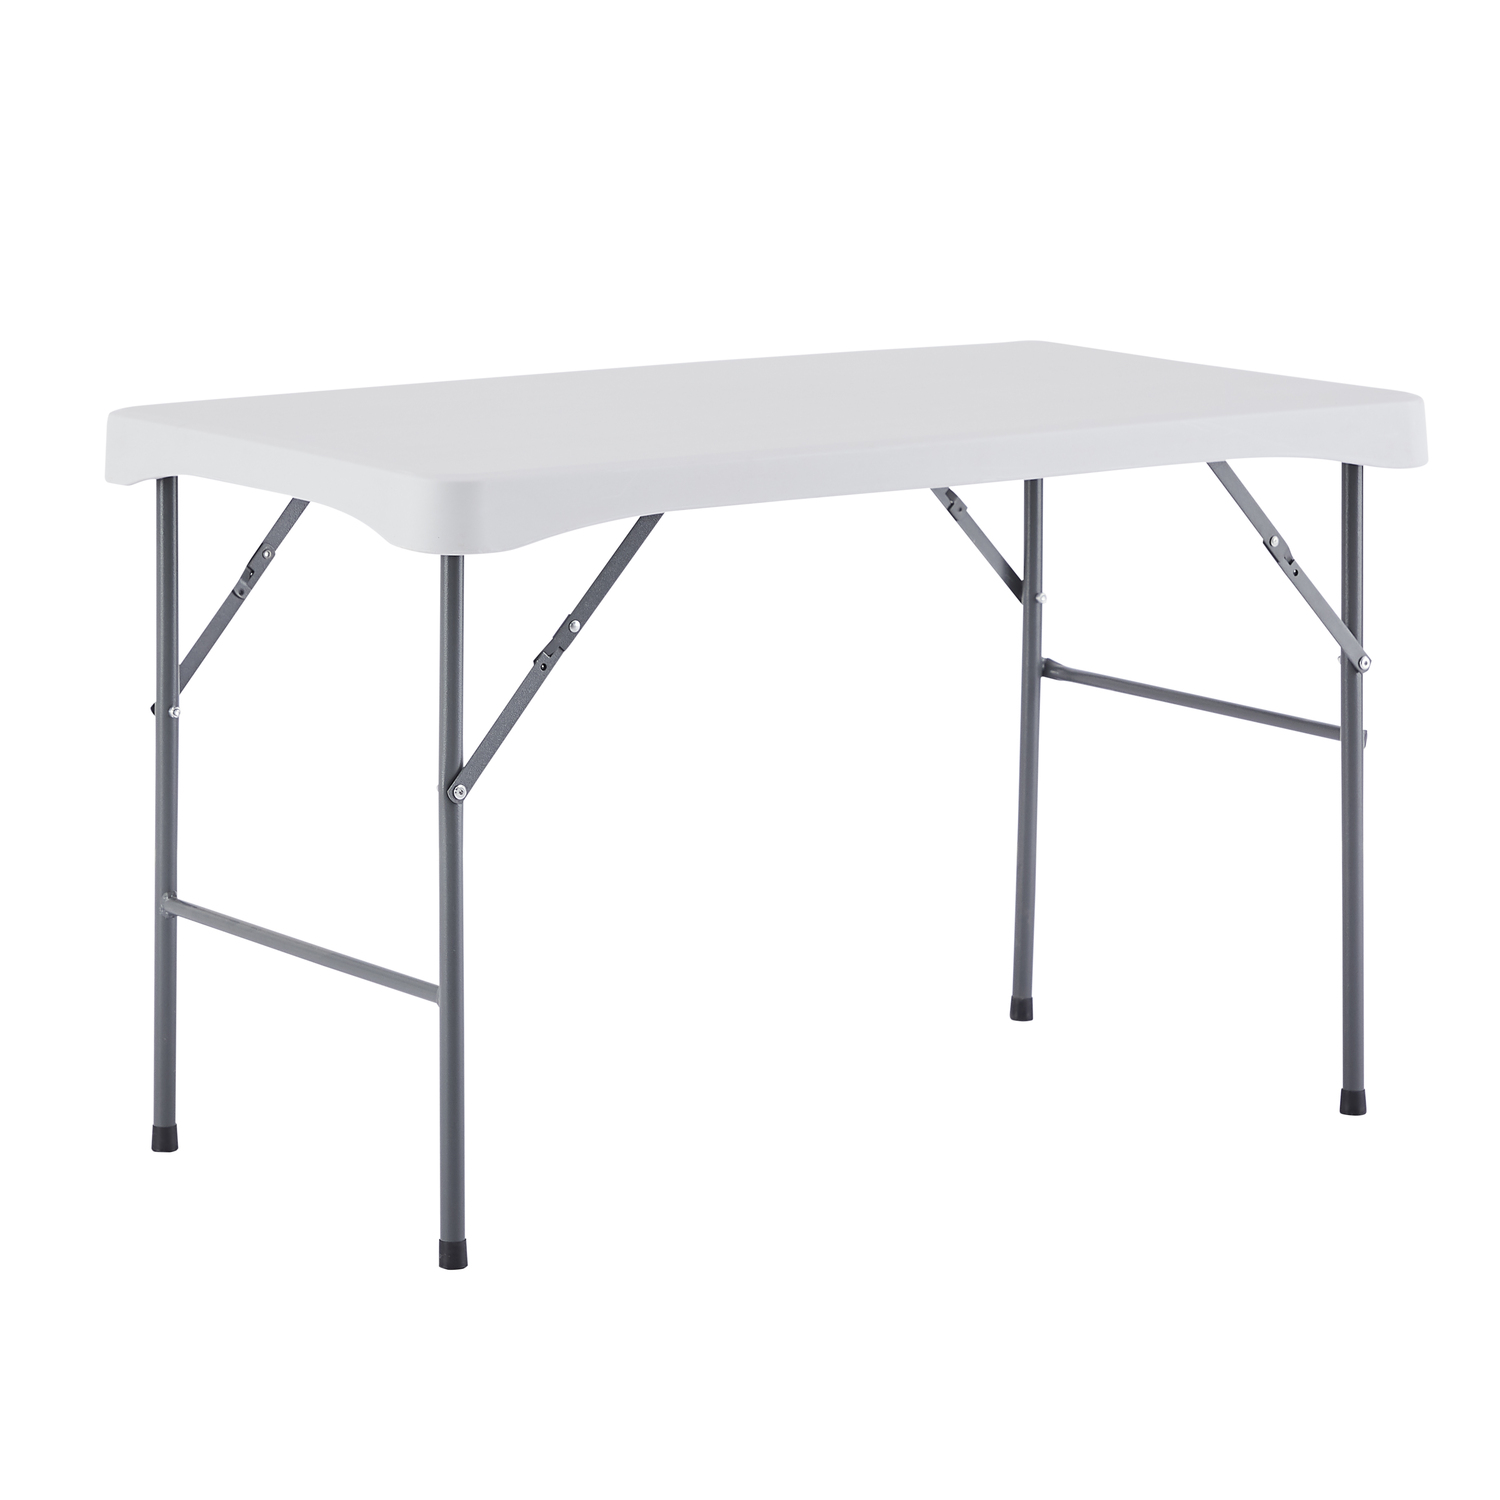 3 Piece Folding Table with Benches, 3.7 Feet Portable Picnic Table Set, Heat Resistant Waterproof Outdoor Dining Table Set, Folding Side Table Set, Table and Bench Set for Party White - image 4 of 7